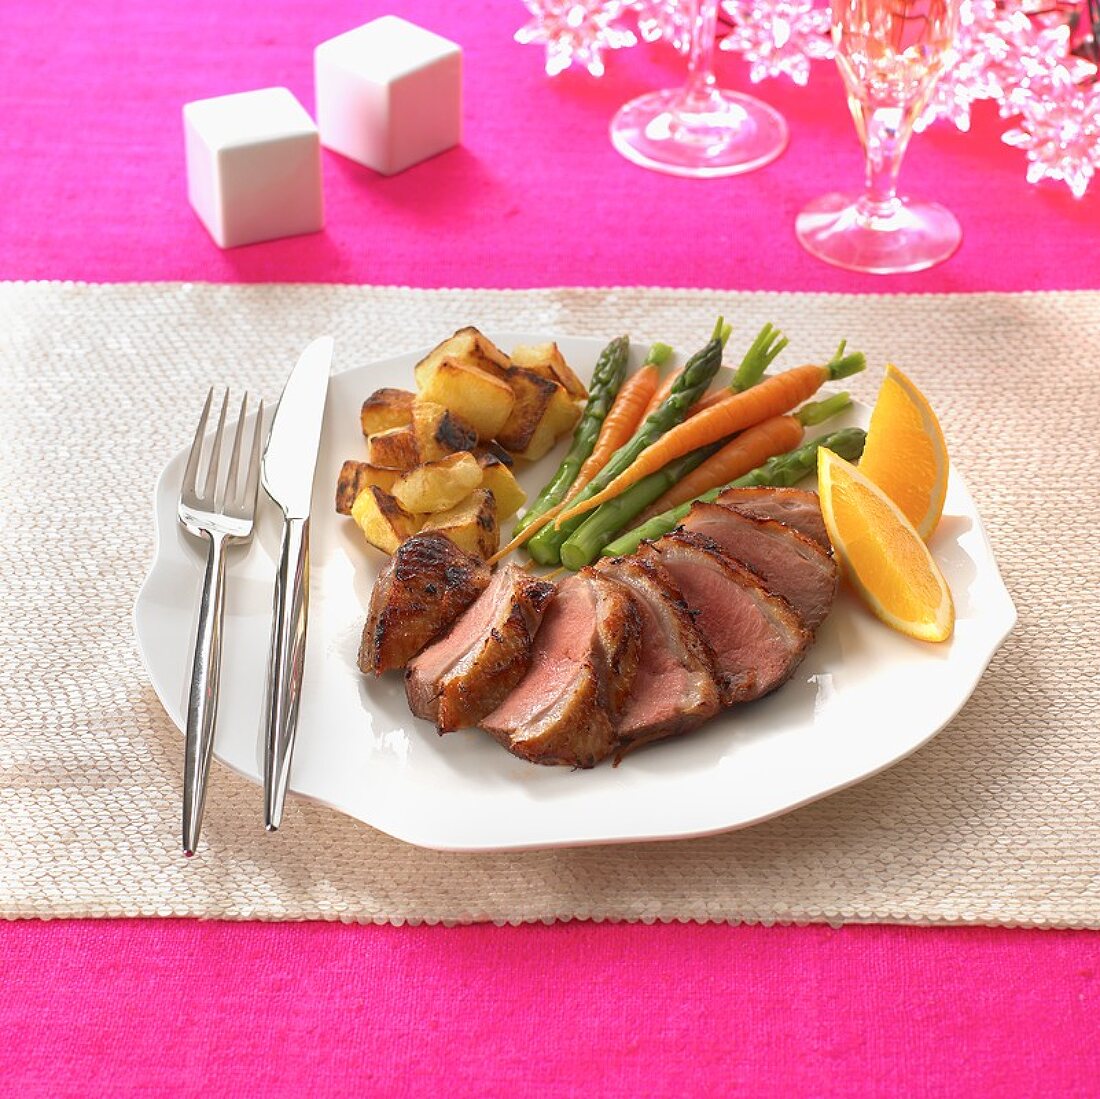 Roast duck breast with orange wedges and vegetables